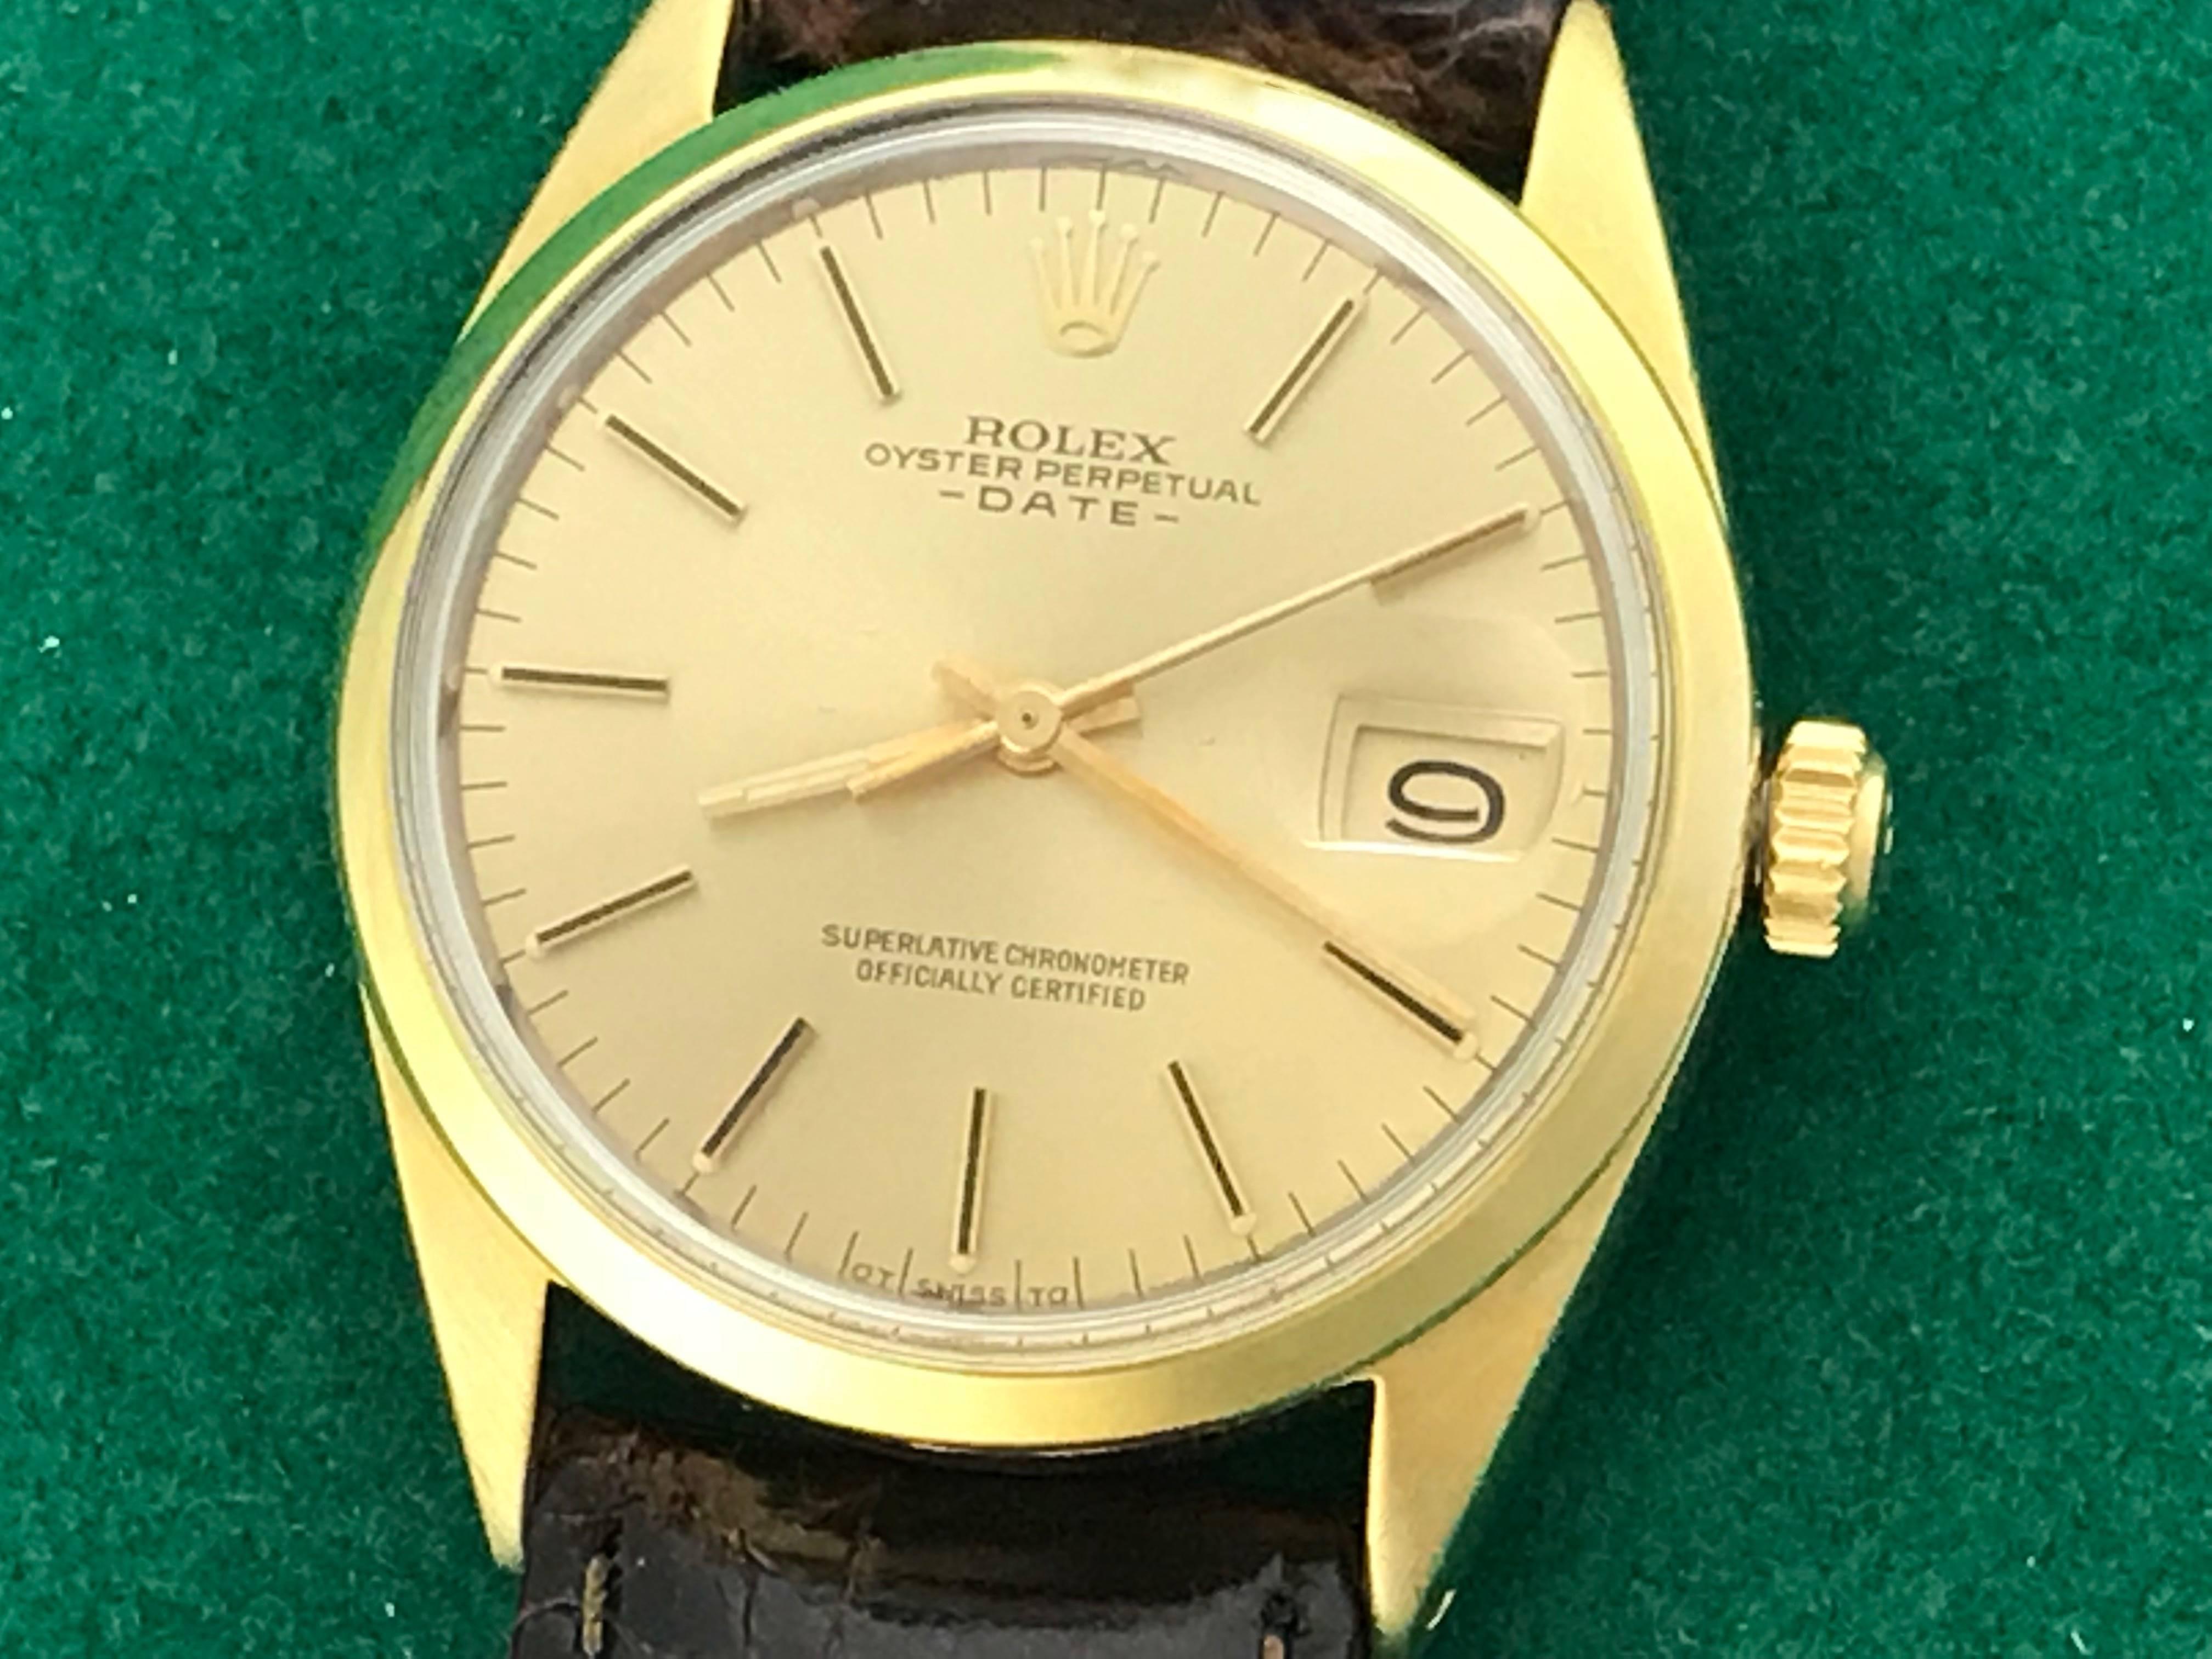 The Rolex Date Model 1550 pre-owned men's automatic wrist watch. Featuring a champagne dial with yellow gold hour markers and stainless steel case with 14K yellow gold smooth bezel. Measures 34mm. Comes with a dark brown alligator strap, box,